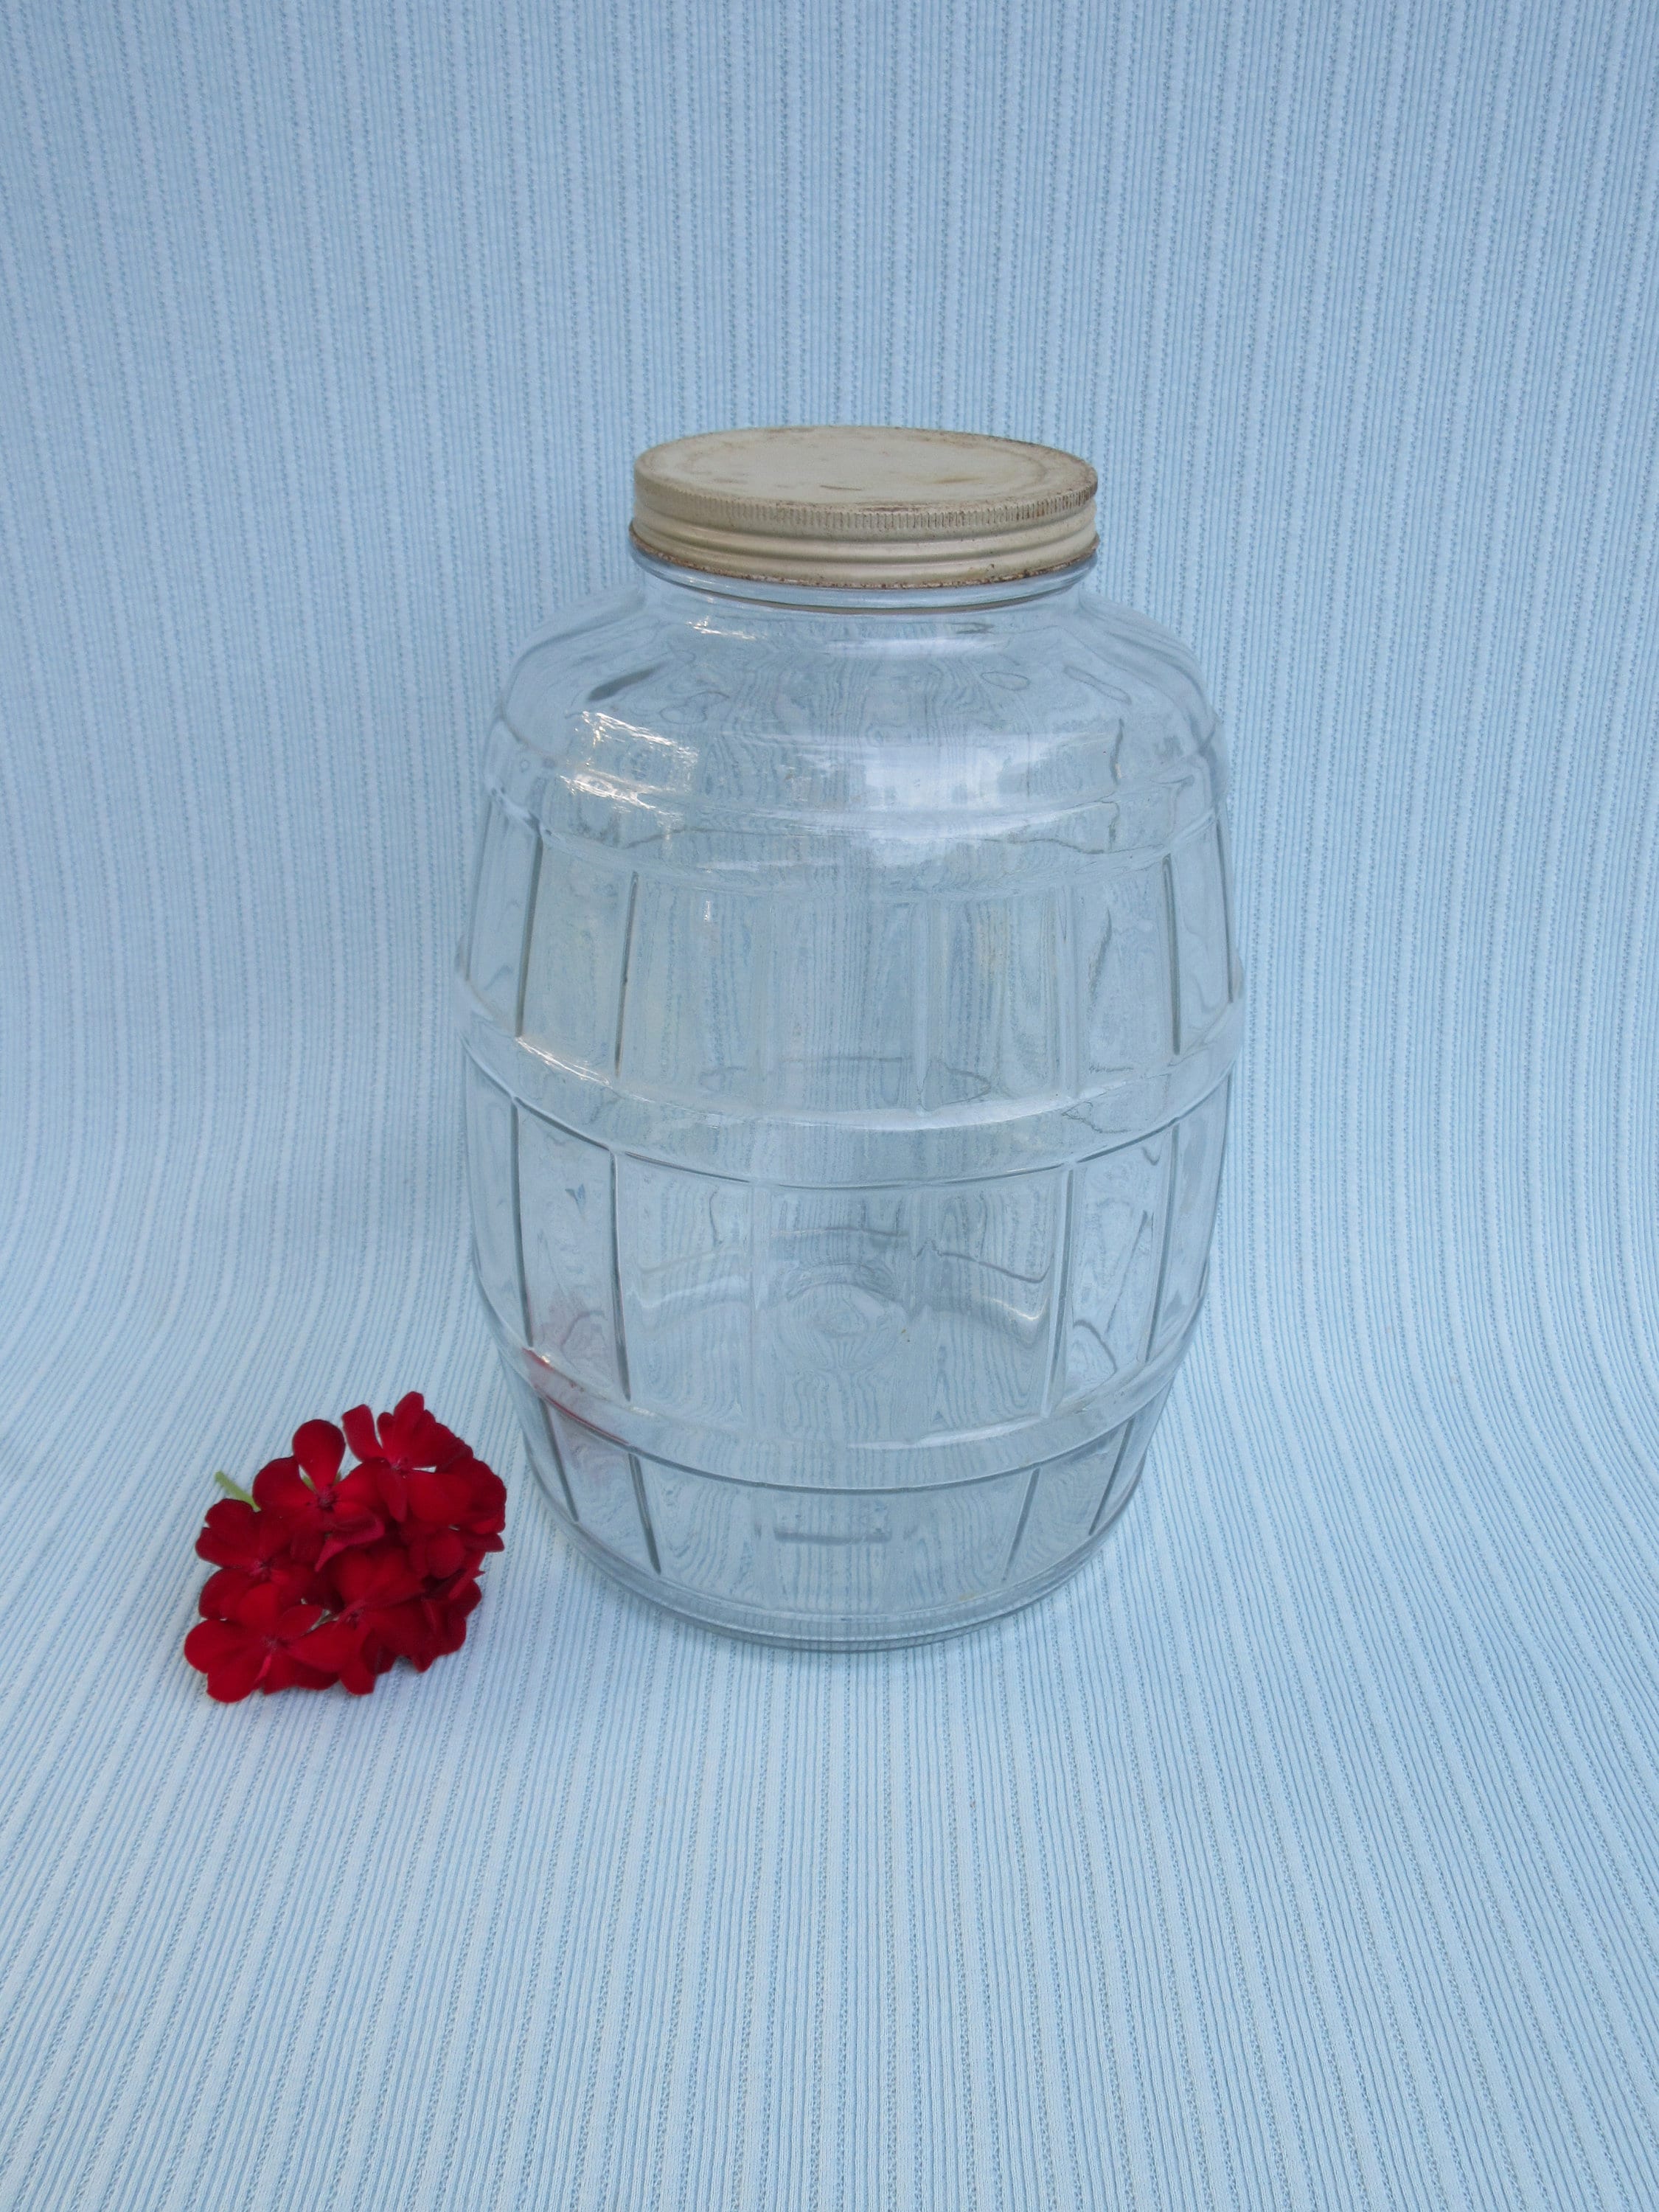 Large Clar Glass Jar 16cm 20cm or 30cm / Kitchen Storage From Recycled  Glass / Large Candle Holder Event or Wedding Decor / Flower Mason Jar 